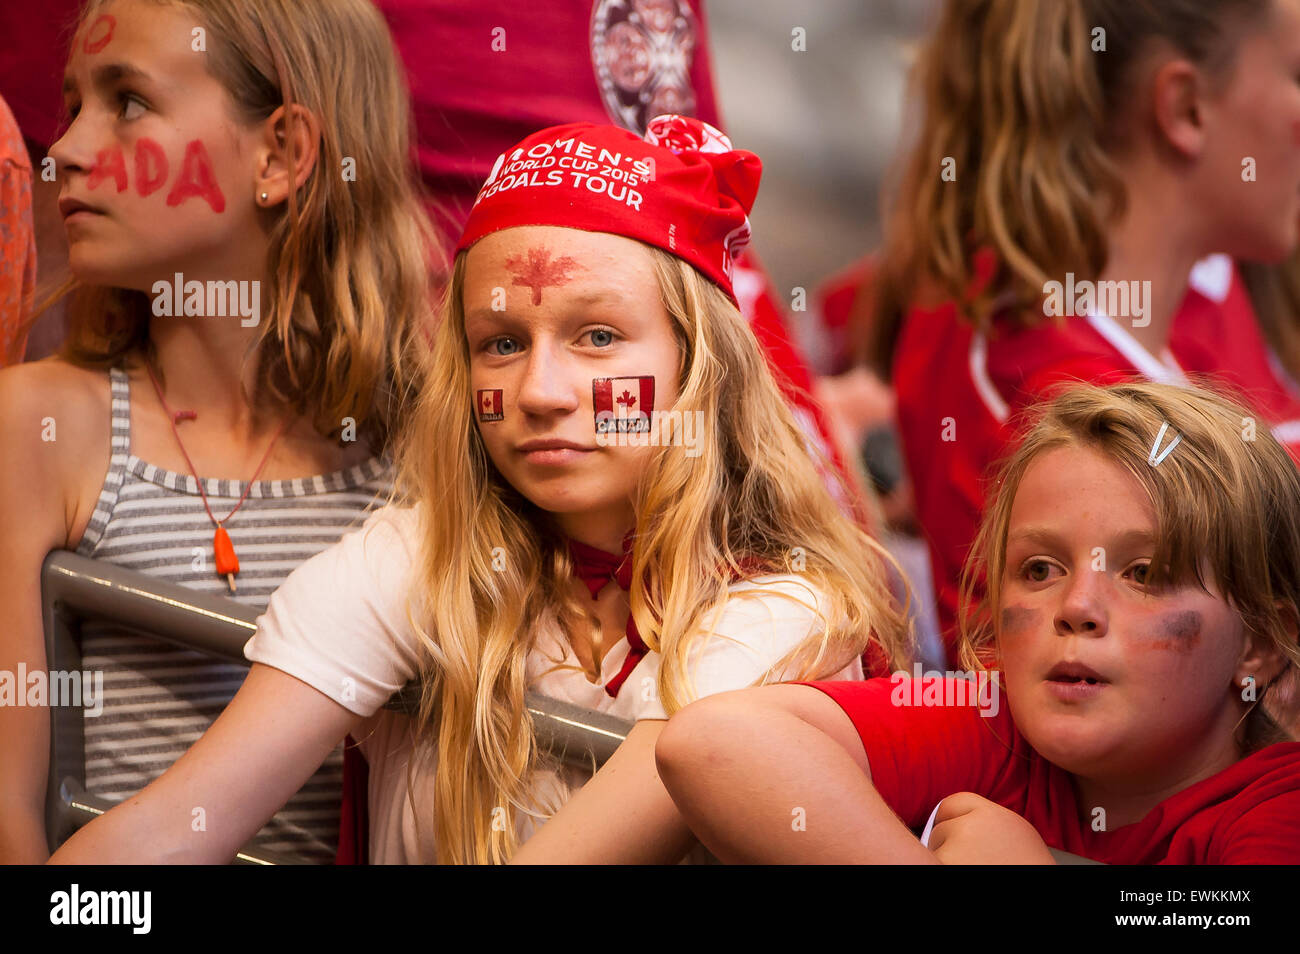 Vancouver, Canada. 27th June, 2015. Canada fans react following the quarterfinal match between Canada and England at the FIFA Women's World Cup Canada 2015 at BC Place Stadium. England won the match 2-1. Credit:  Matt Jacques/Alamy Live News Stock Photo